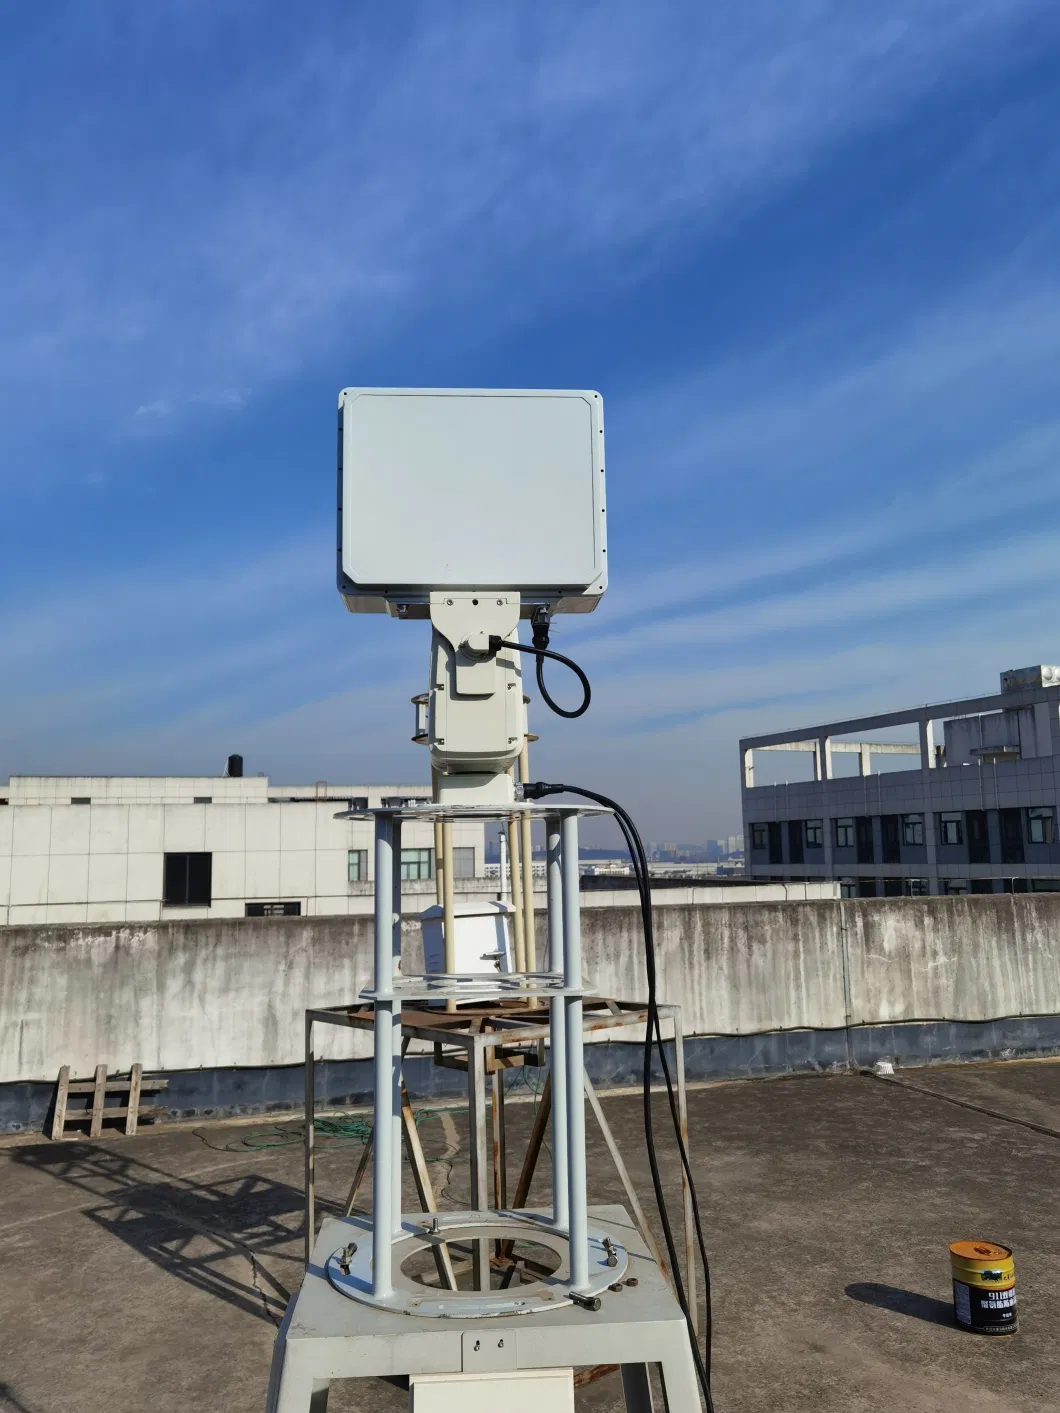 Small Target Tracking with X Band Radar Surveillance Security